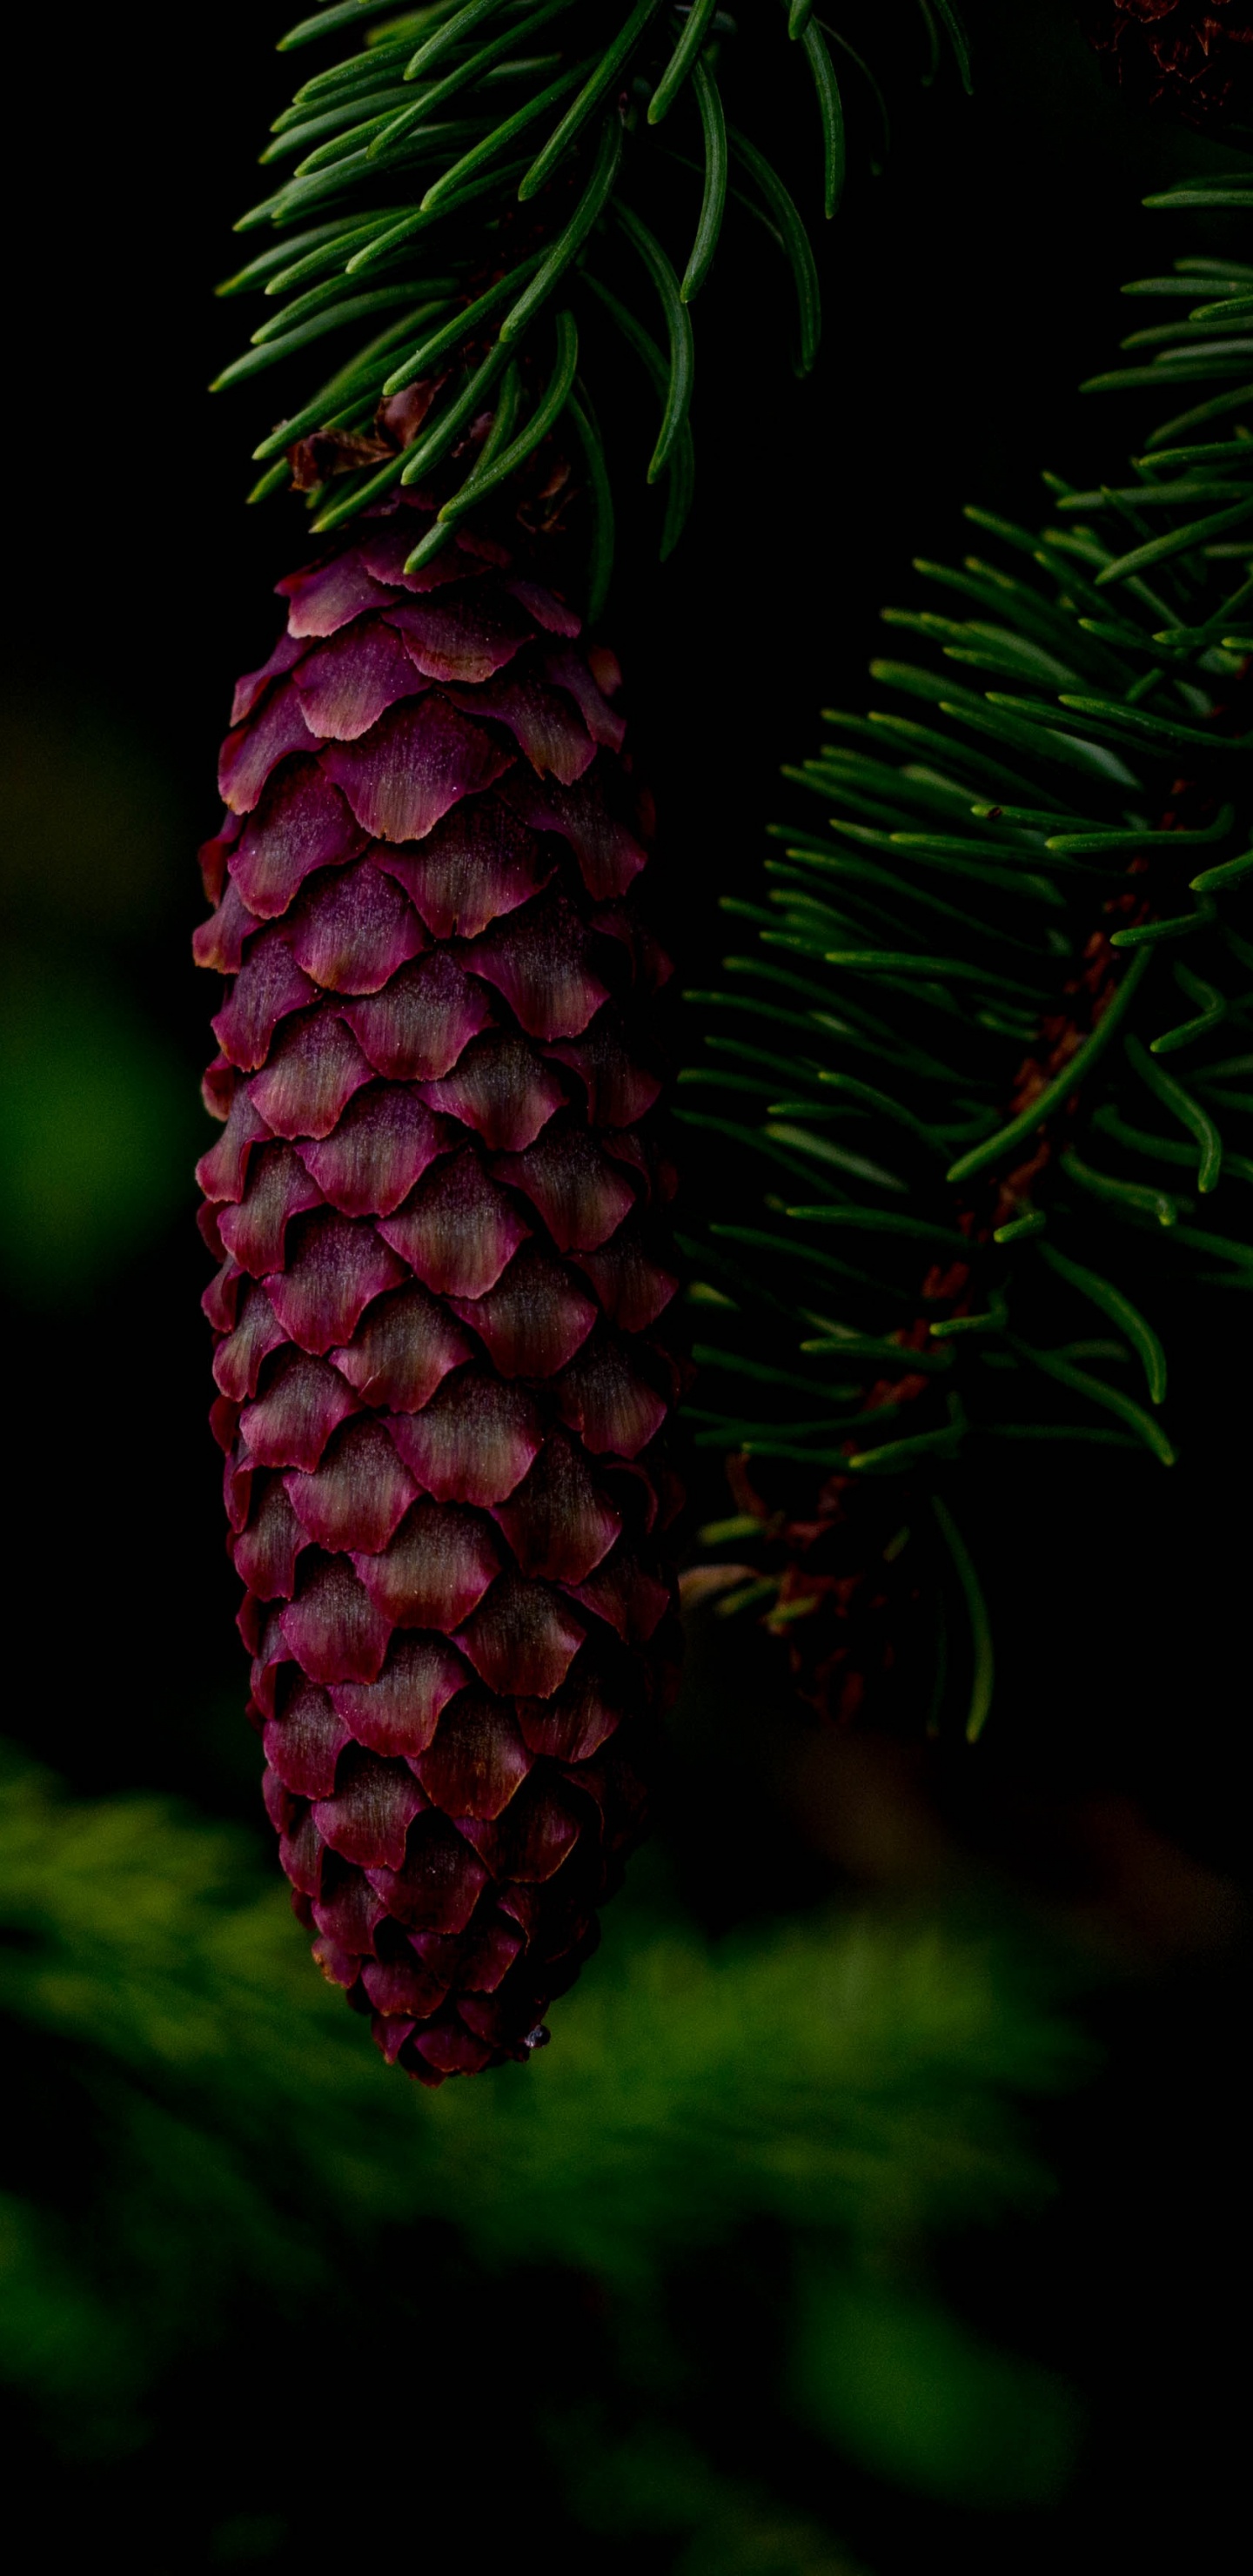 Red Pine Cone on Green Pine Tree. Wallpaper in 1440x2960 Resolution